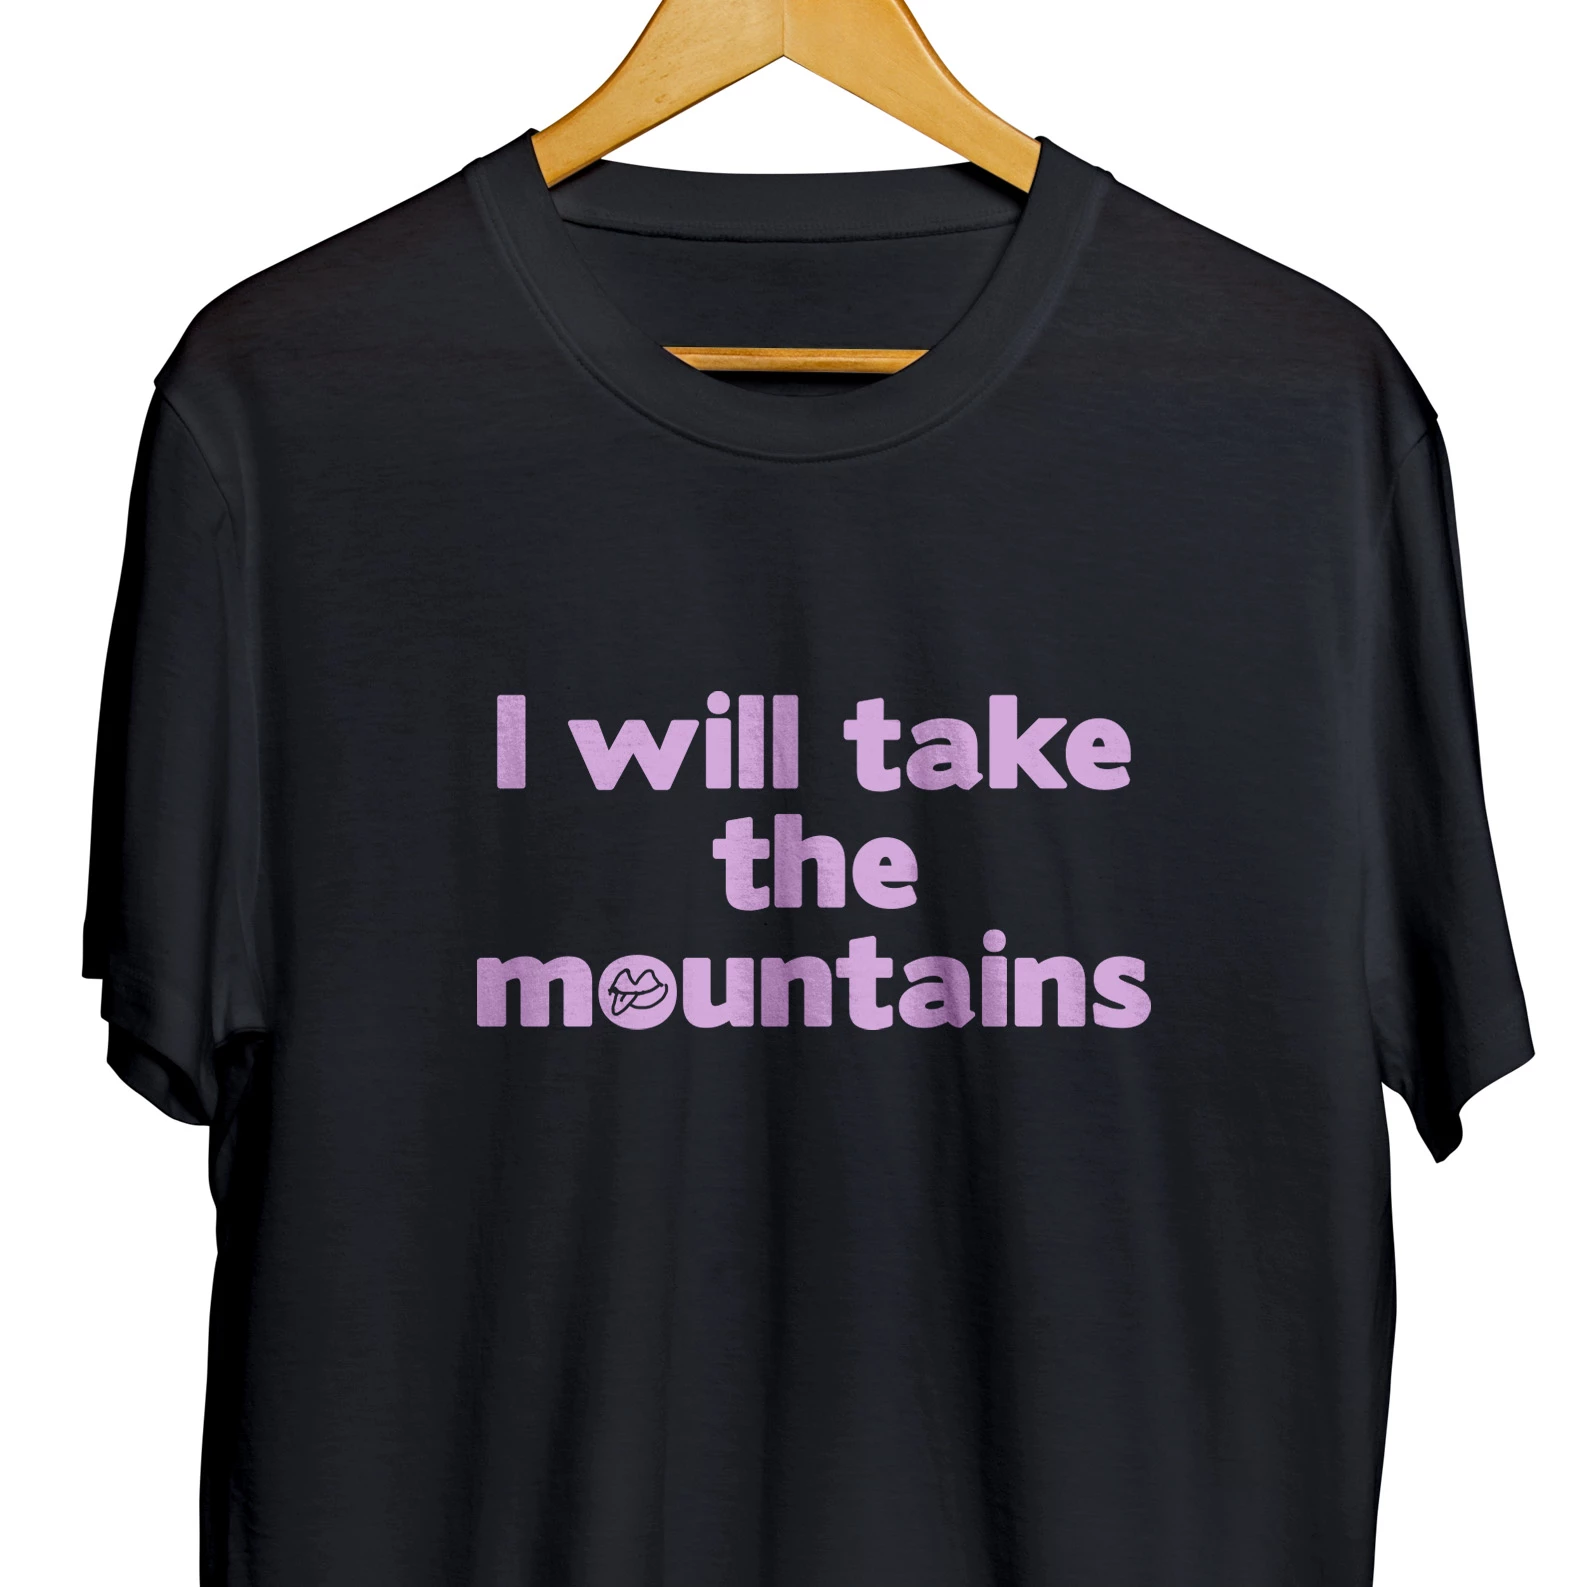 I will take the mountains T-shirt